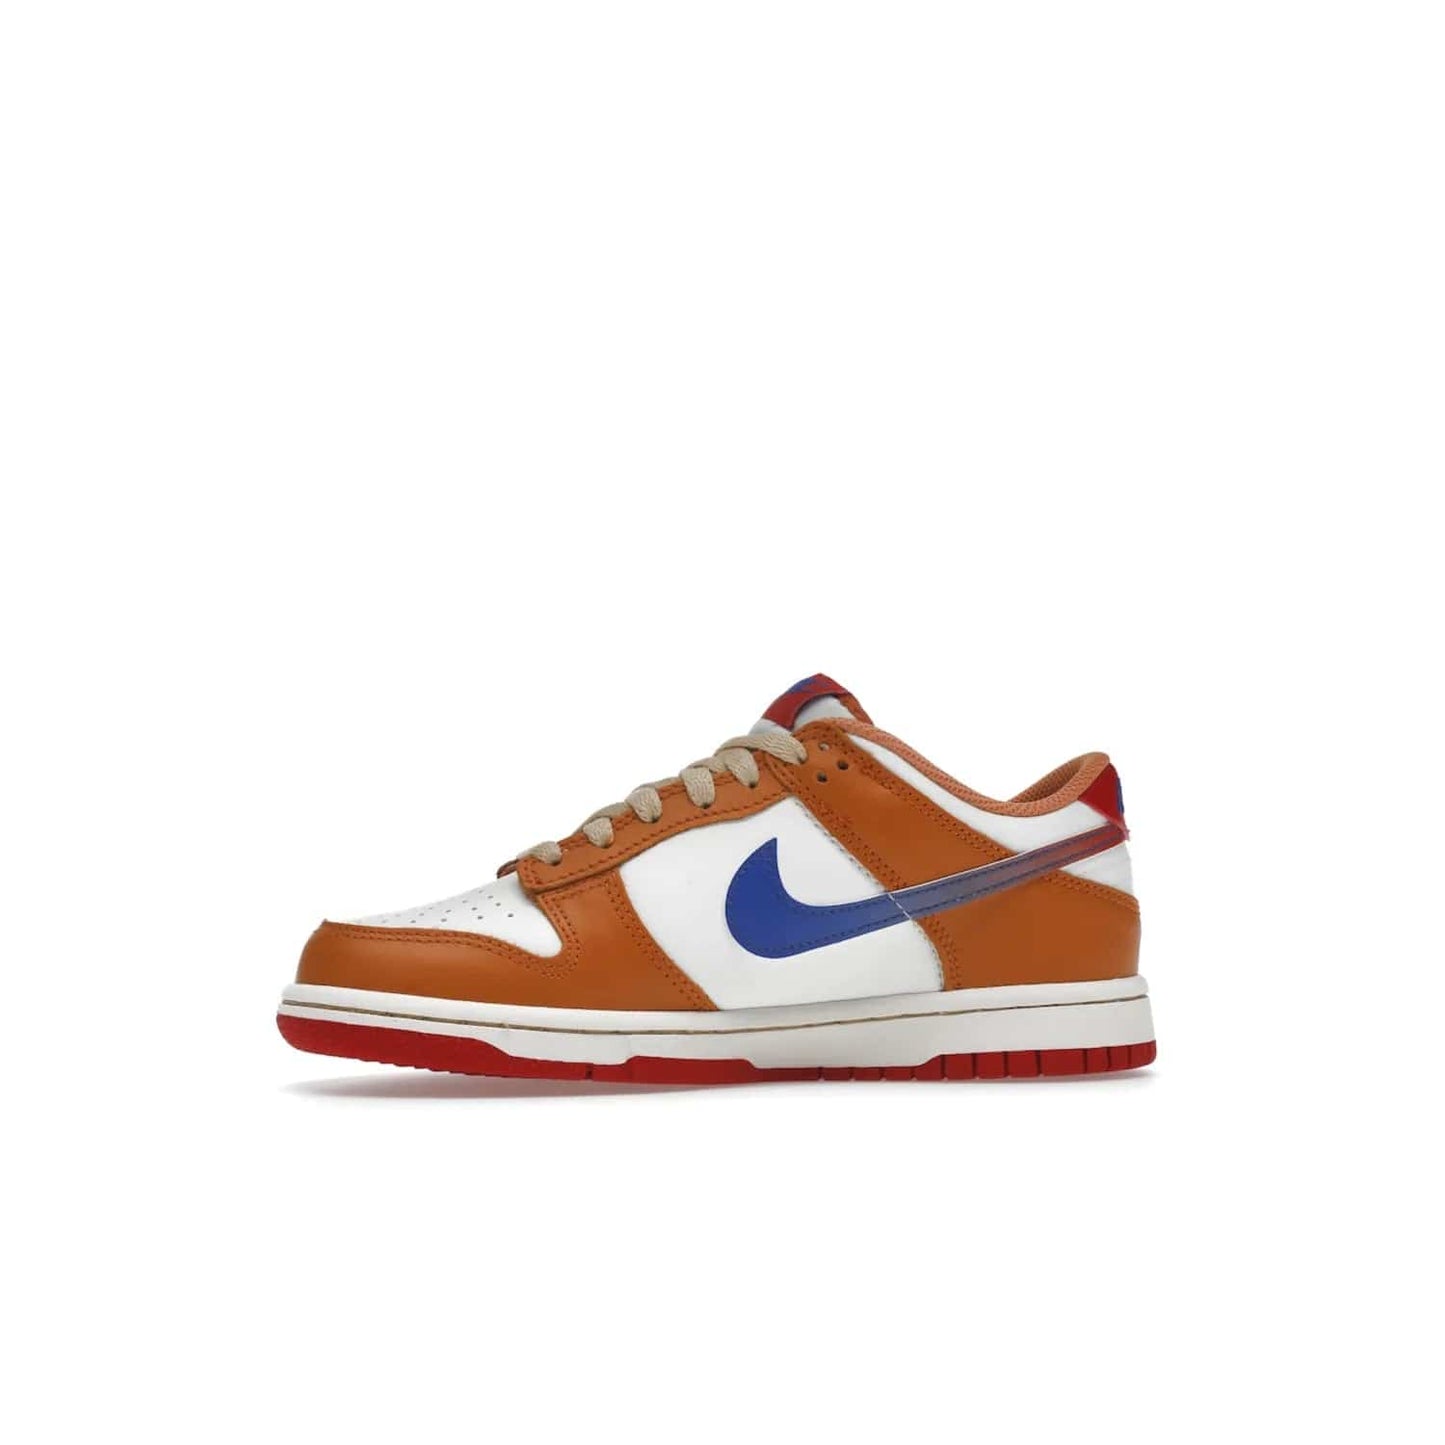 Nike Dunk Low Hot Curry Game Royal (GS) - Image 18 - Only at www.BallersClubKickz.com - Shop the Nike Dunk Low Hot Curry Game Royal GS and rock a classic color scheme to represent the New York Knicks. Featuring a smooth leather upper, retro Nike branding and a low cut collar and rubber cup sole for comfort and protection. Get yours on September 7 at $85.